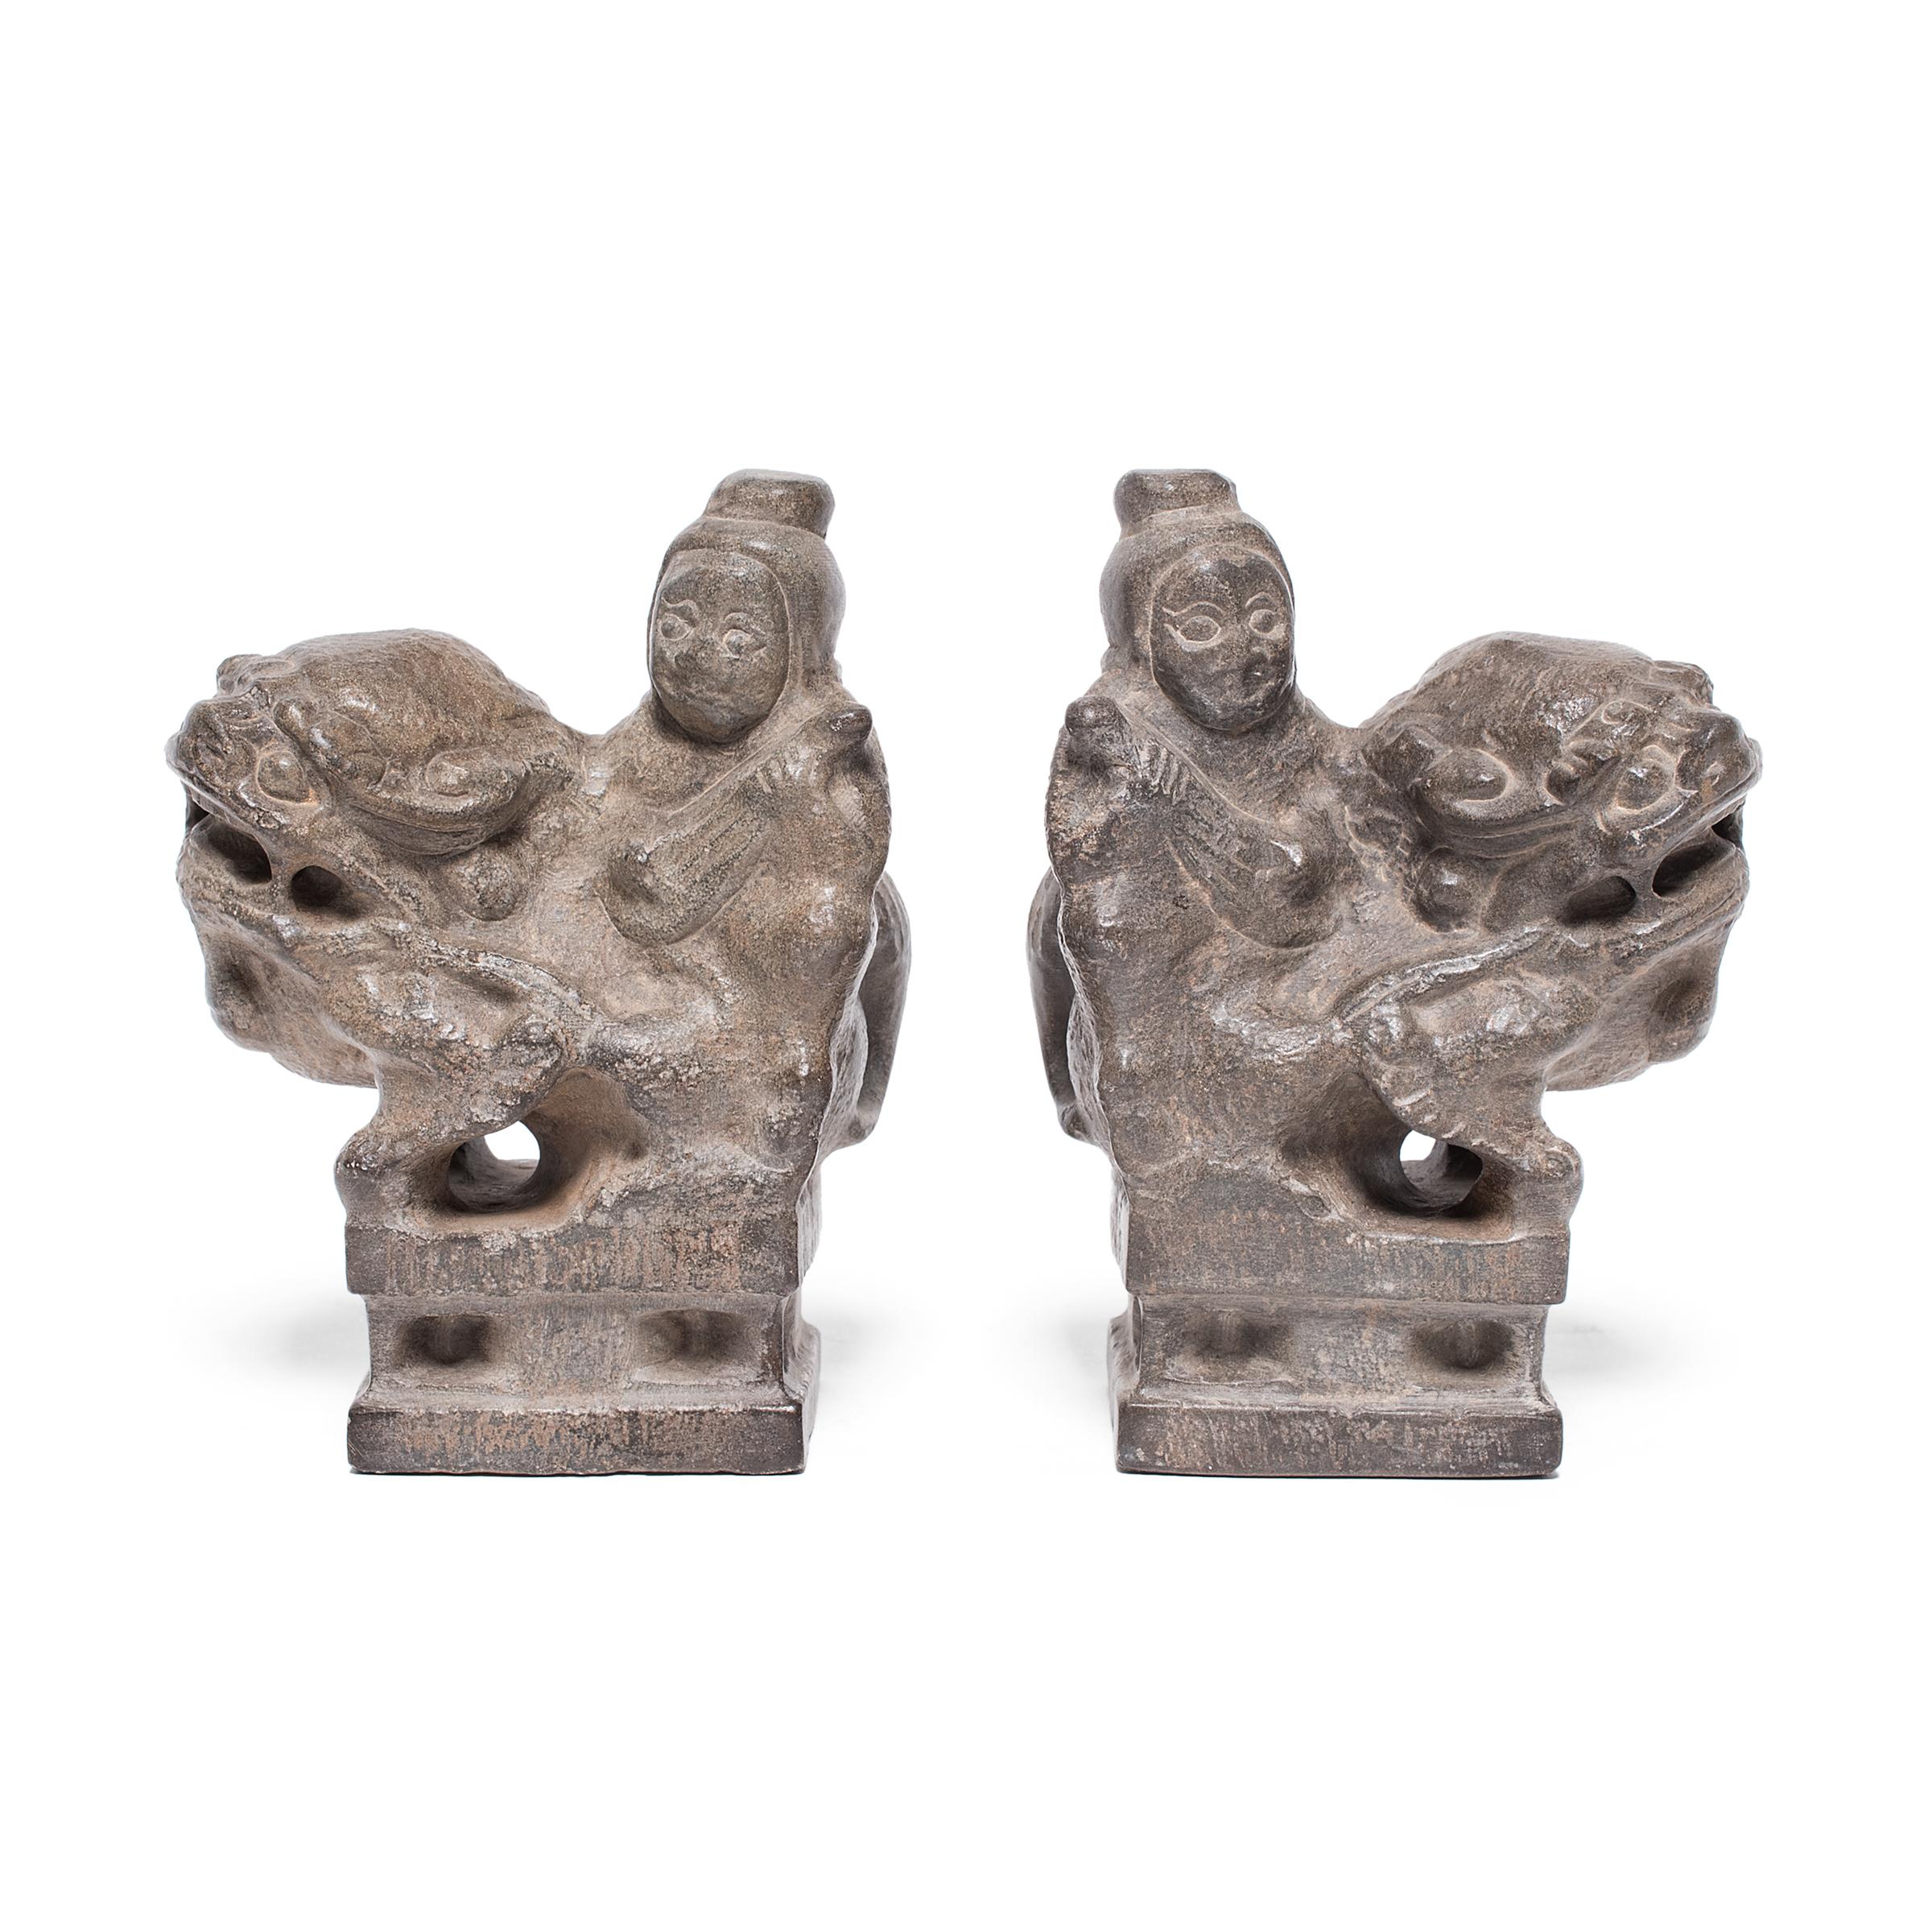 With curly manes and playful expressions, these petite stone fu dogs are adorable companions and benevolent guardians of the home. Also known as shizi, the pair represents yin and yang, the dual forces of the universe. Seated in mirrored postures